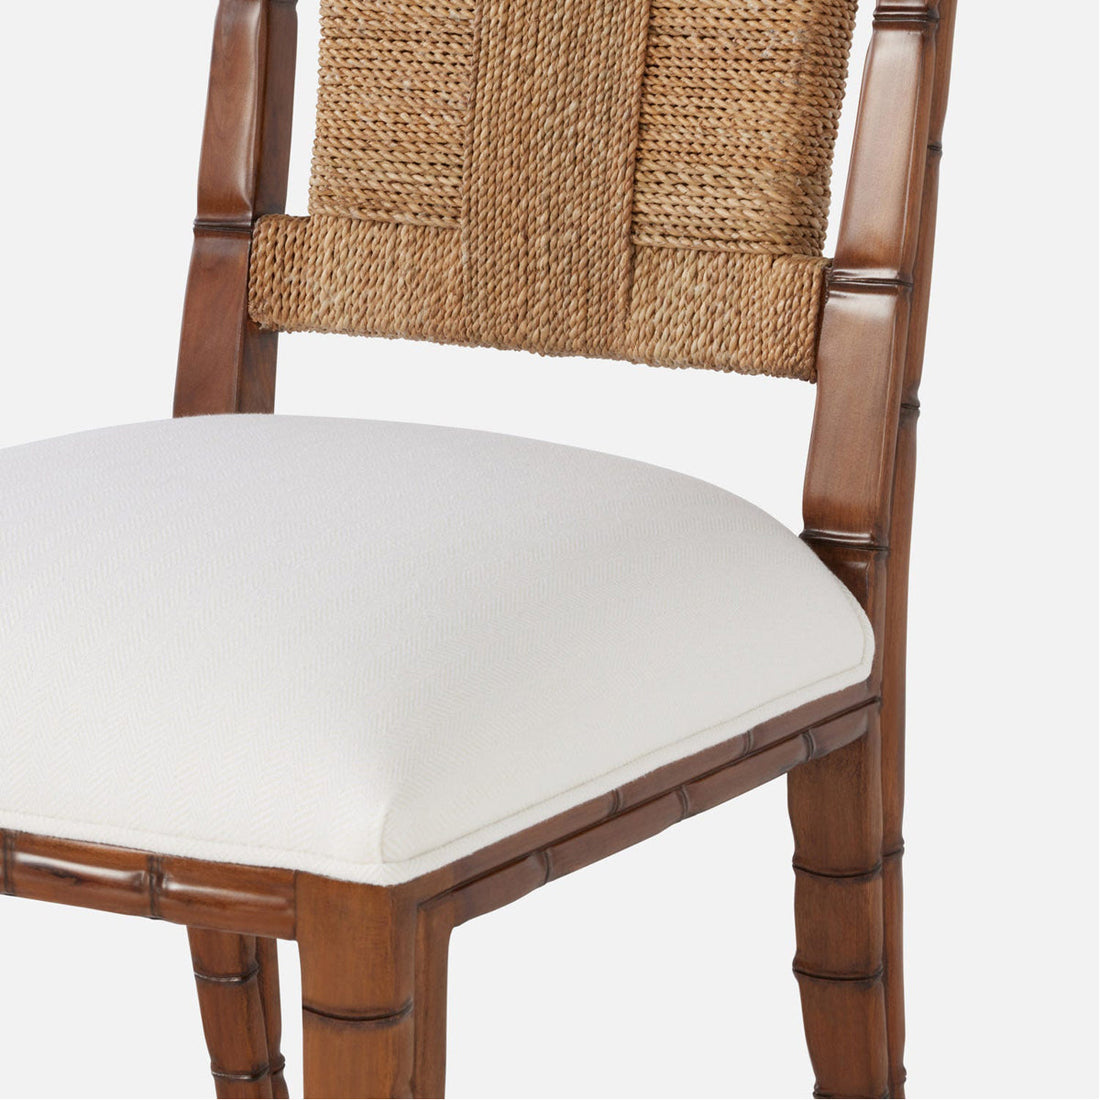 Made Goods Kiera Dining Chair in Arno Fabric